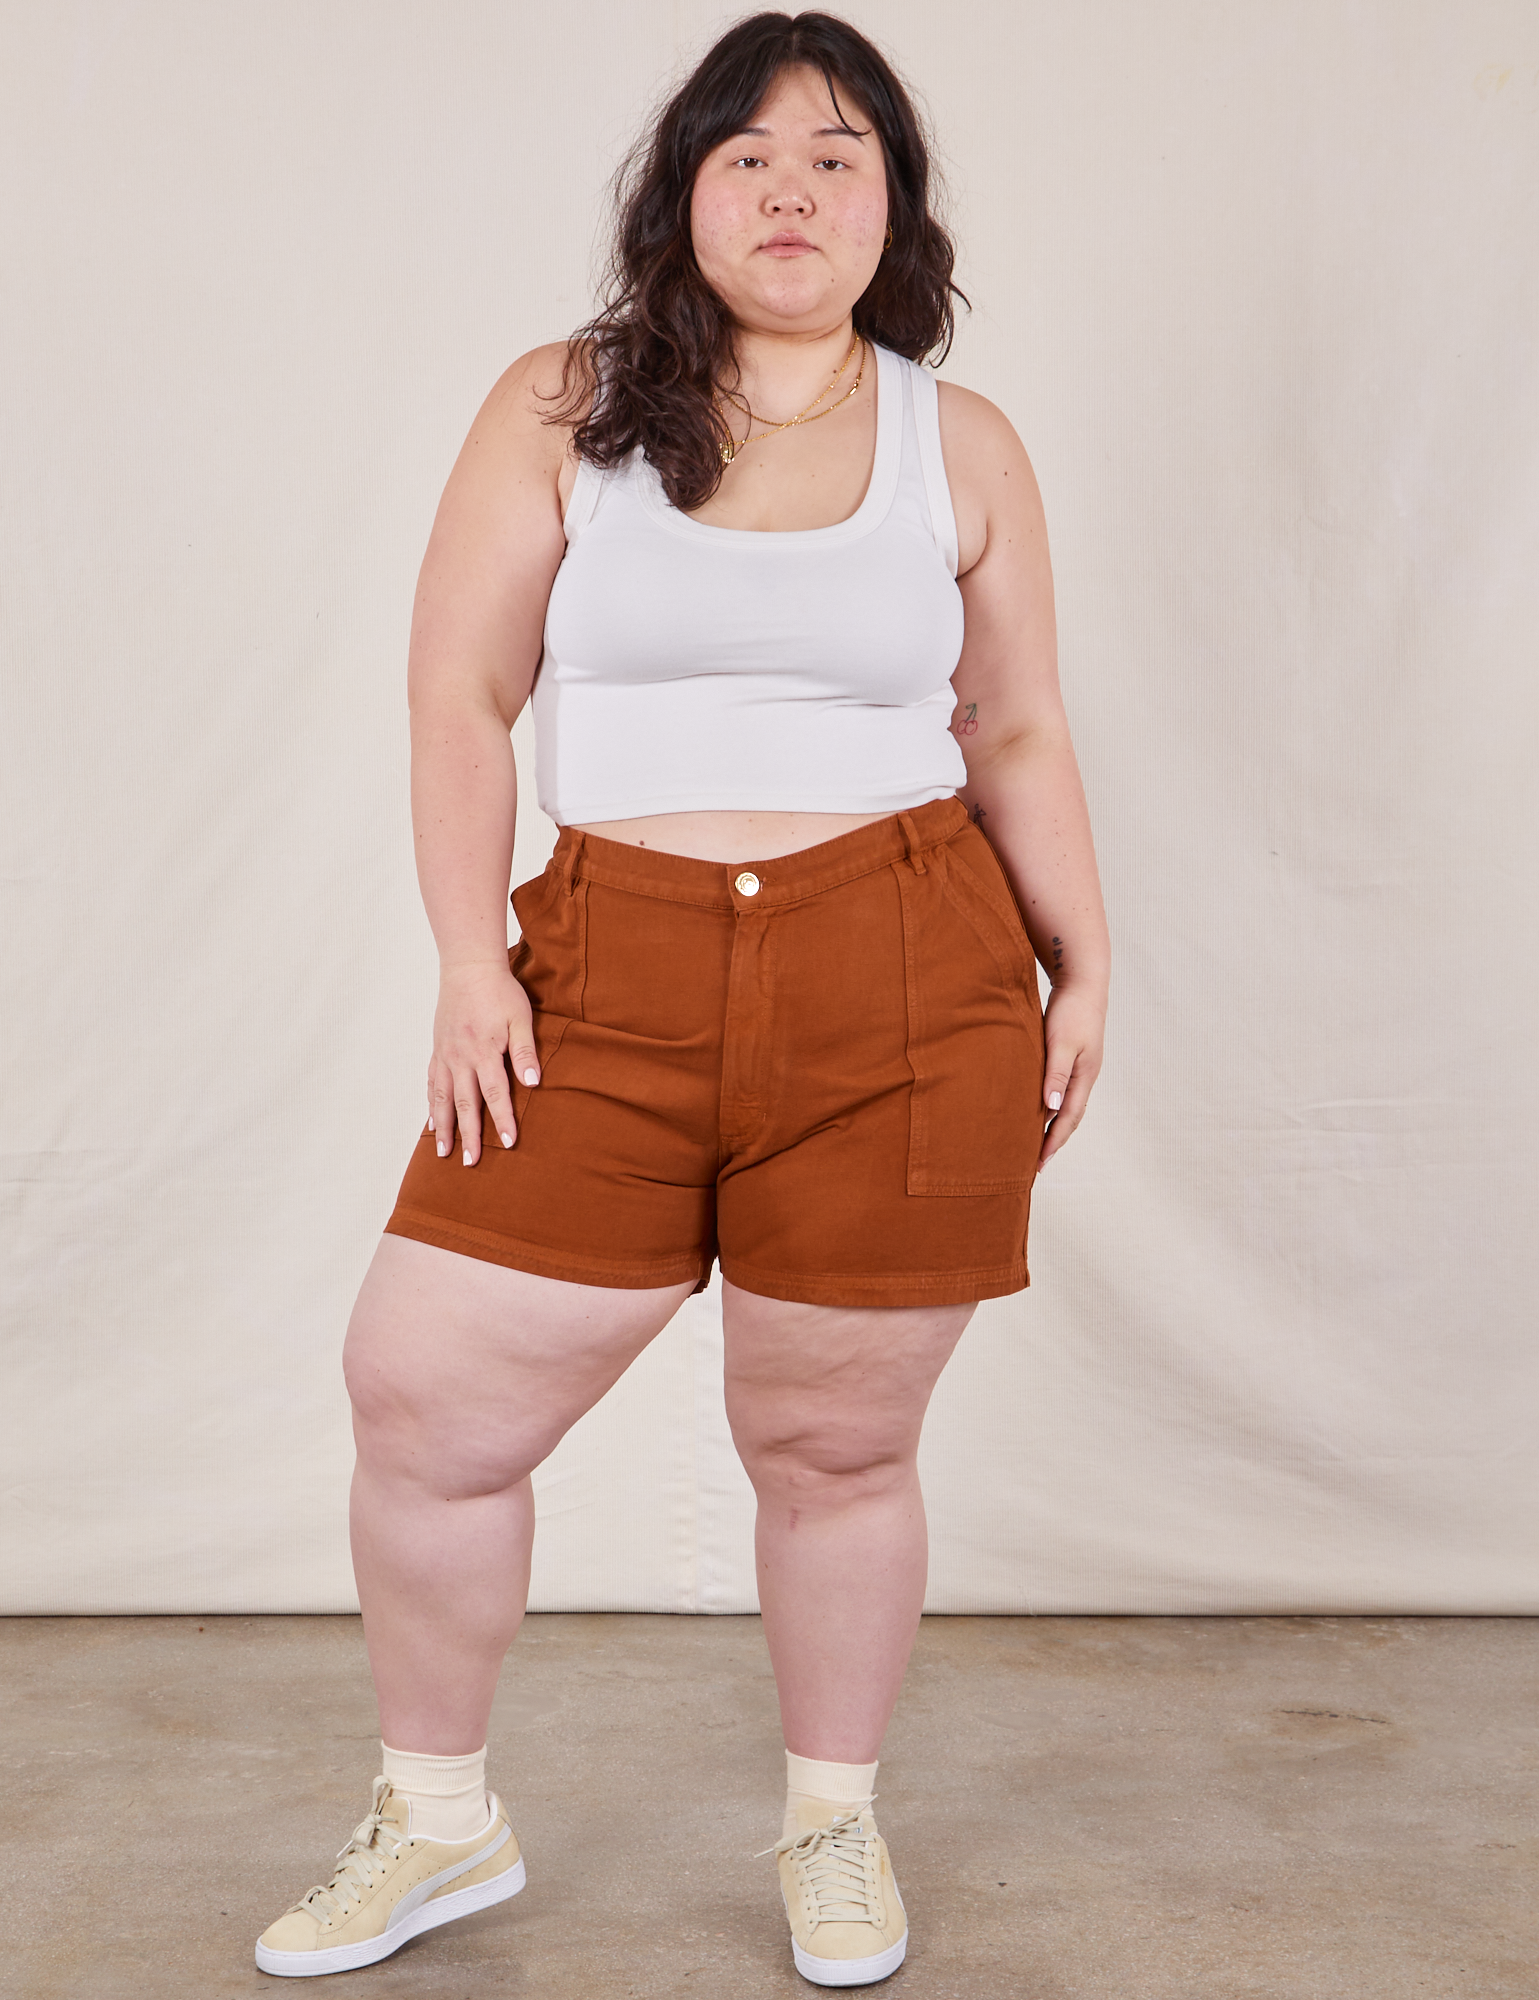 Ashley is 5’7” and wearing 1XL Classic Work Shorts in Burnt Terracotta paired with Cropped Tank Top in vintage tee off-white